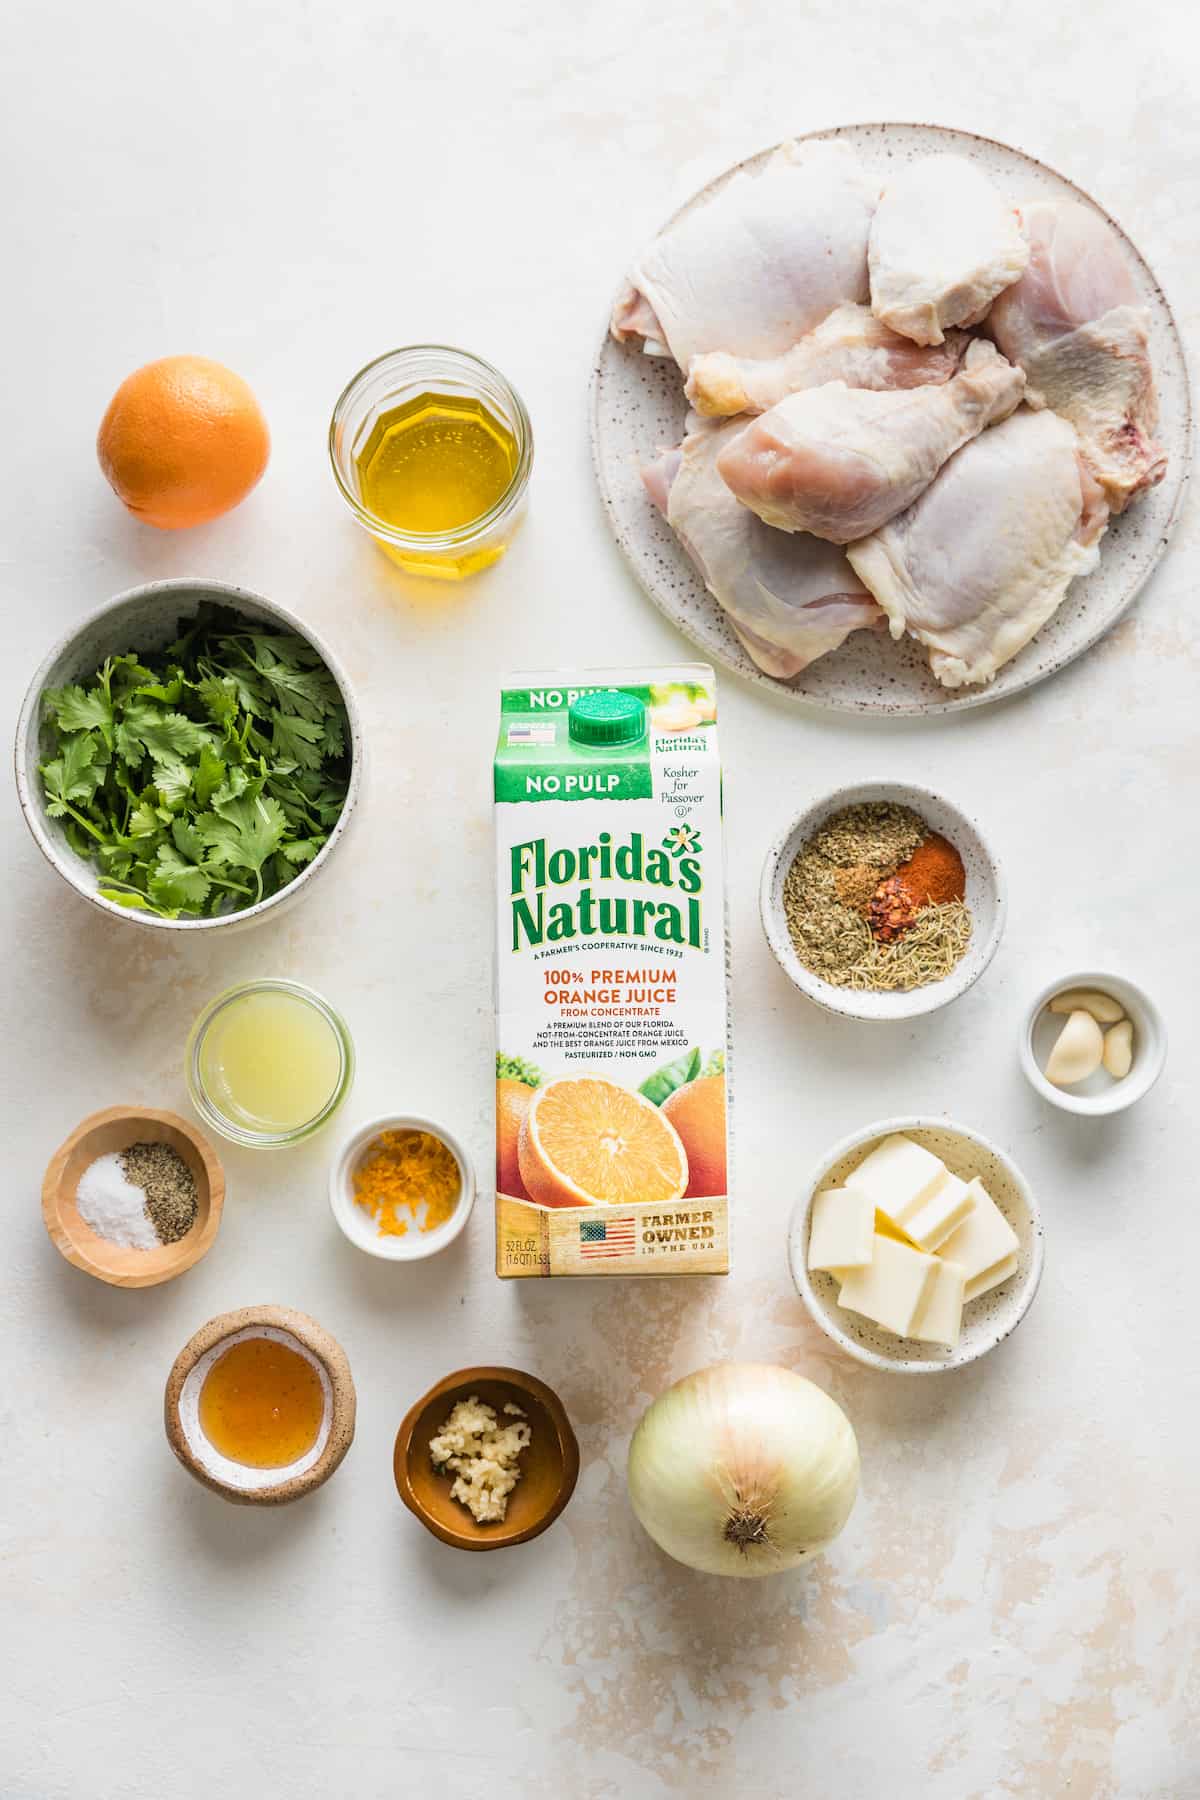 Ingredients to make baked orange herb chicken on a white surface.